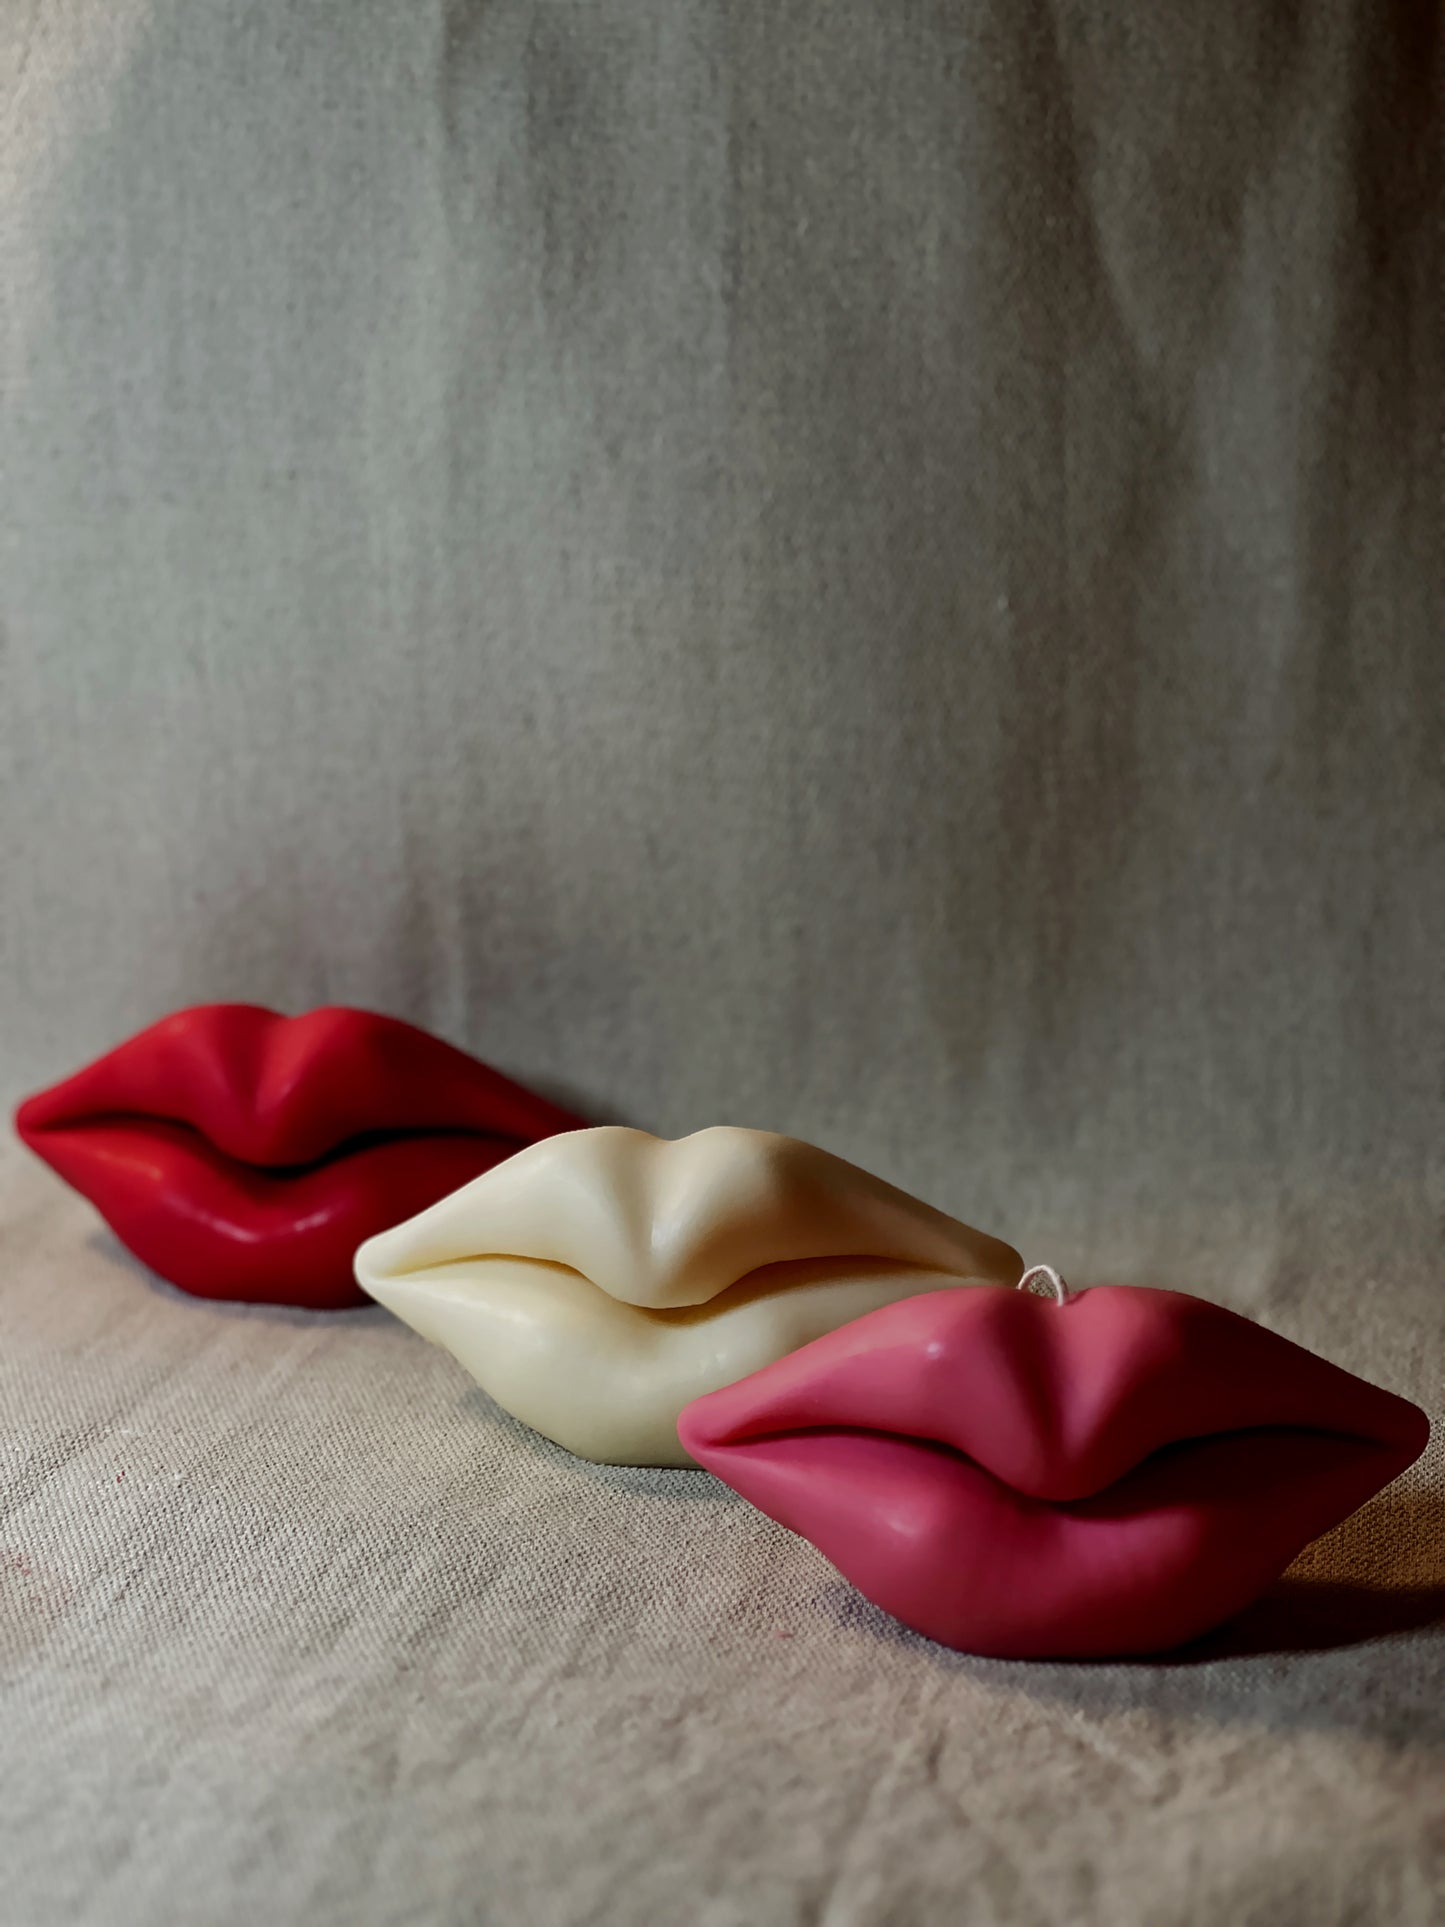 Kissable Glow: Luxurious Lip-shaped Candle